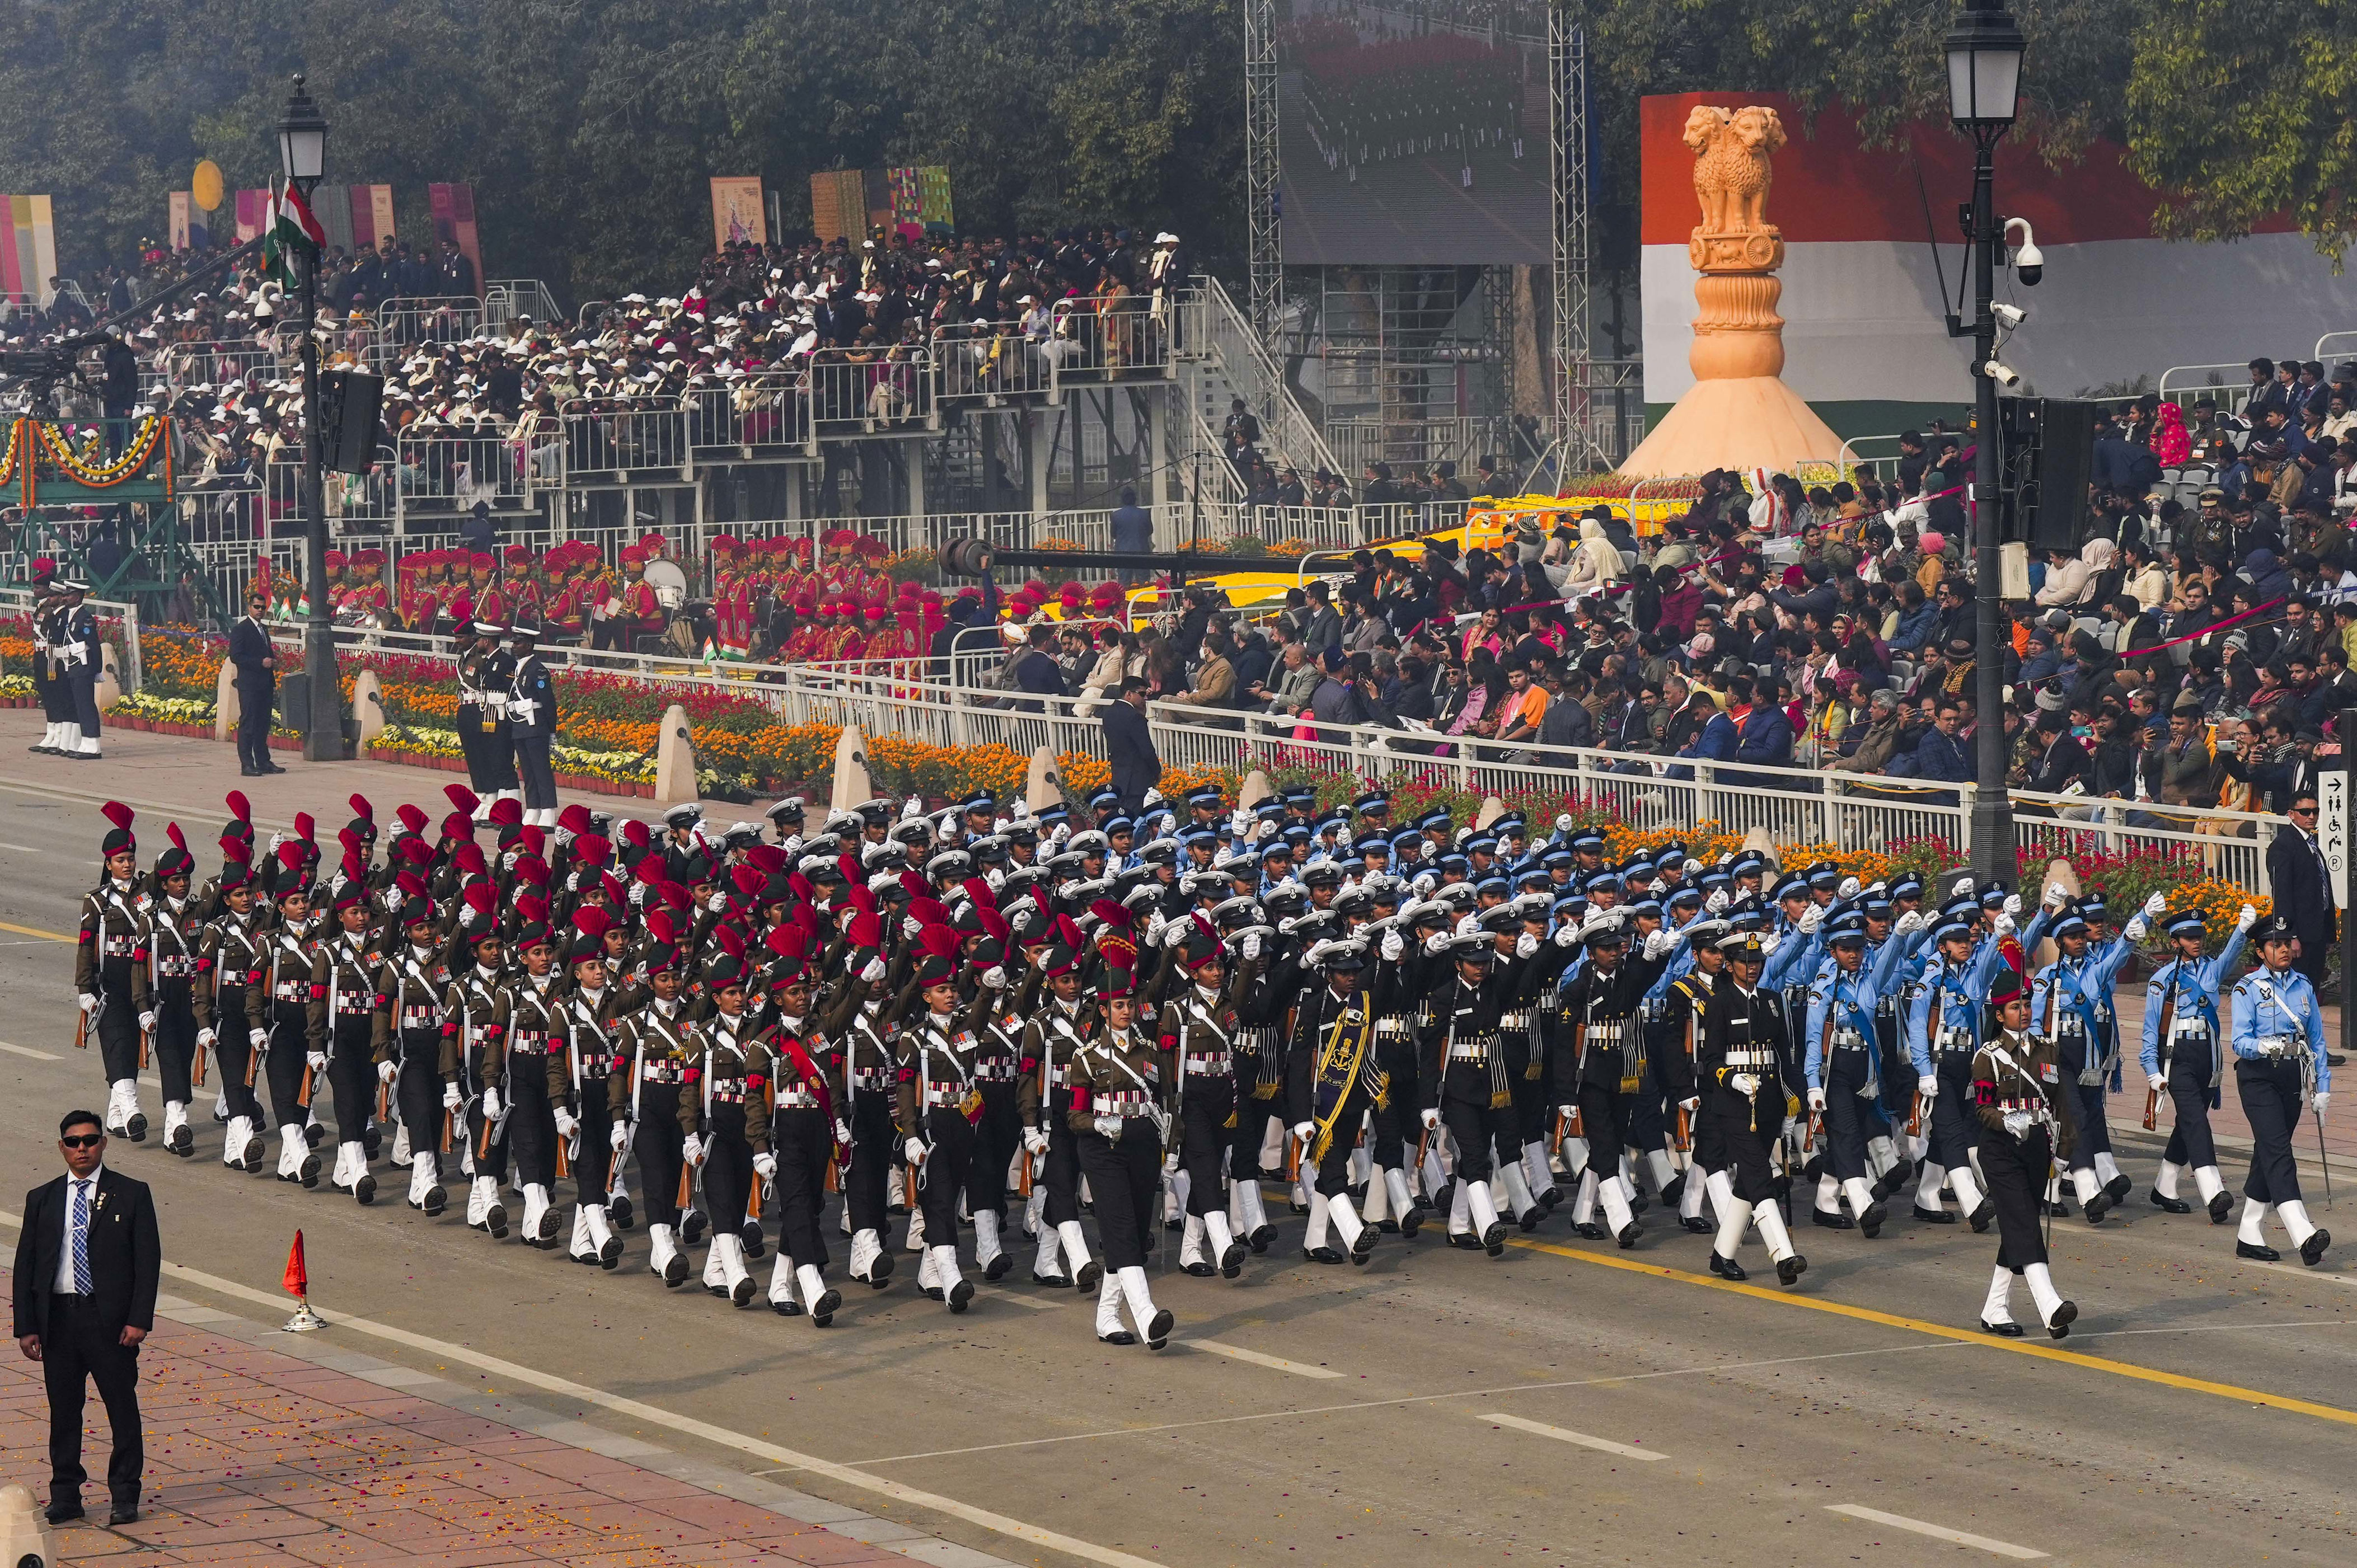 1950 r-day celebrations were held at a stadium; delhi turned into 'fairlyland' on jan 26 night